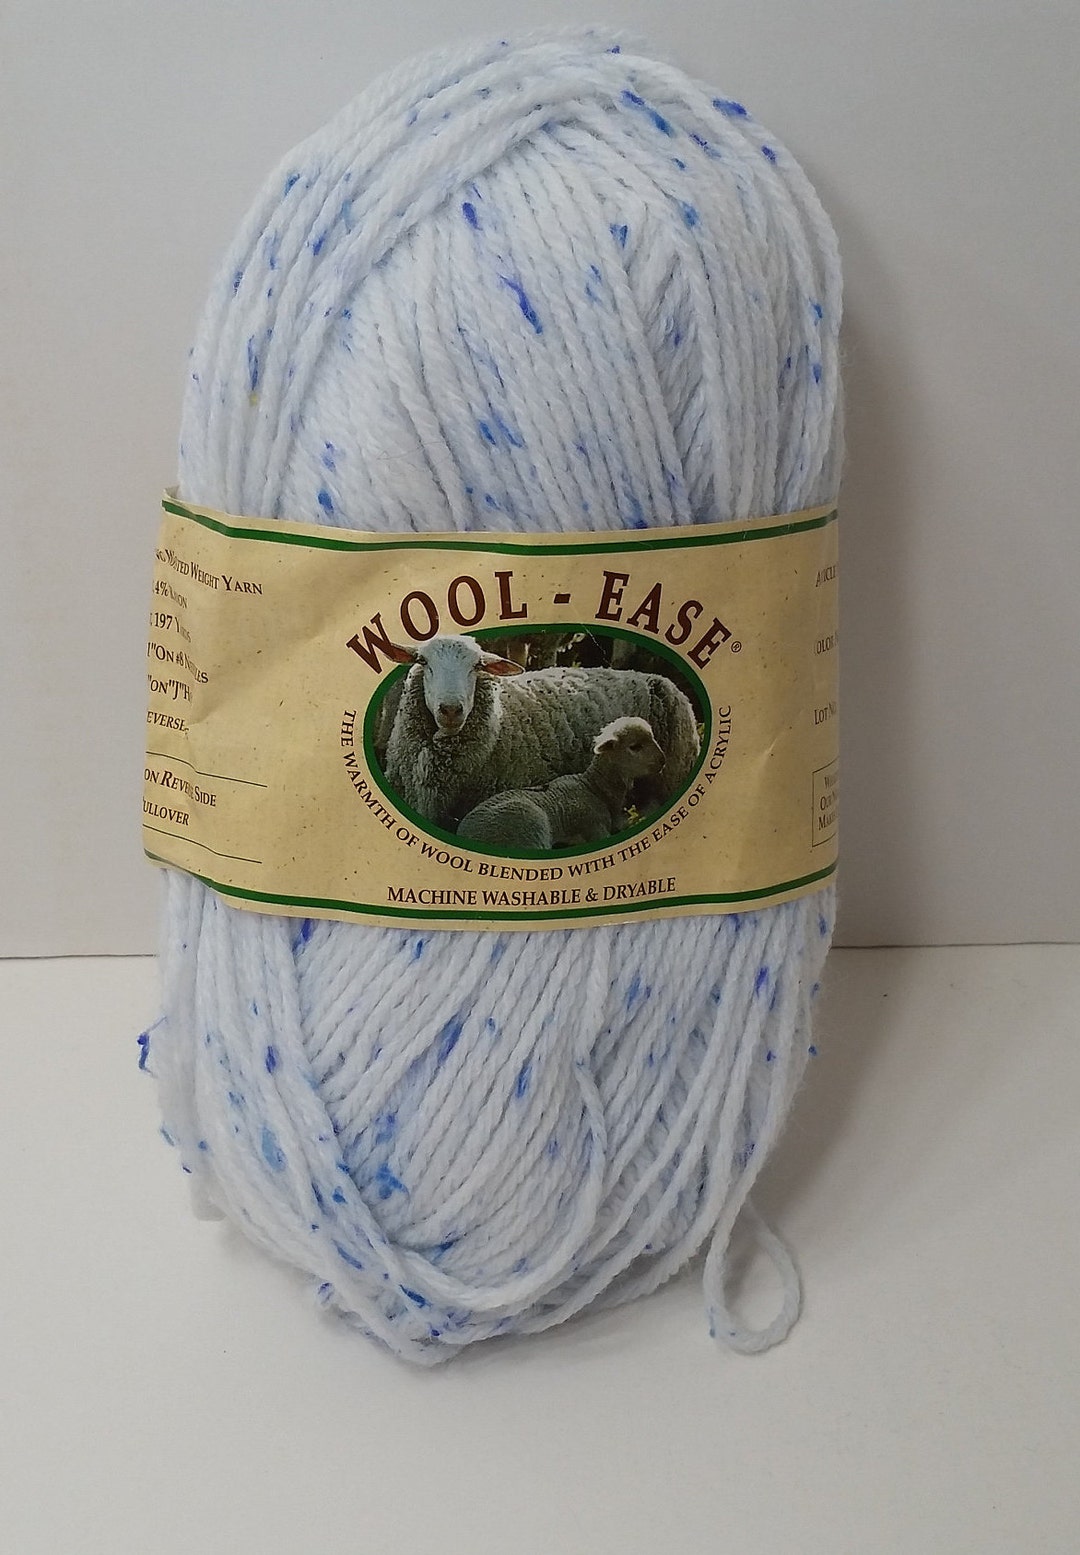 1 Skein 2 Skeins Available Lion Brand Wool-ease Yarn, Color Wedgewood, Dye  Lot 11092, 3 Oz/85g, 197yd, 4 Ply Worsted Weight, Wool Blend -  Canada